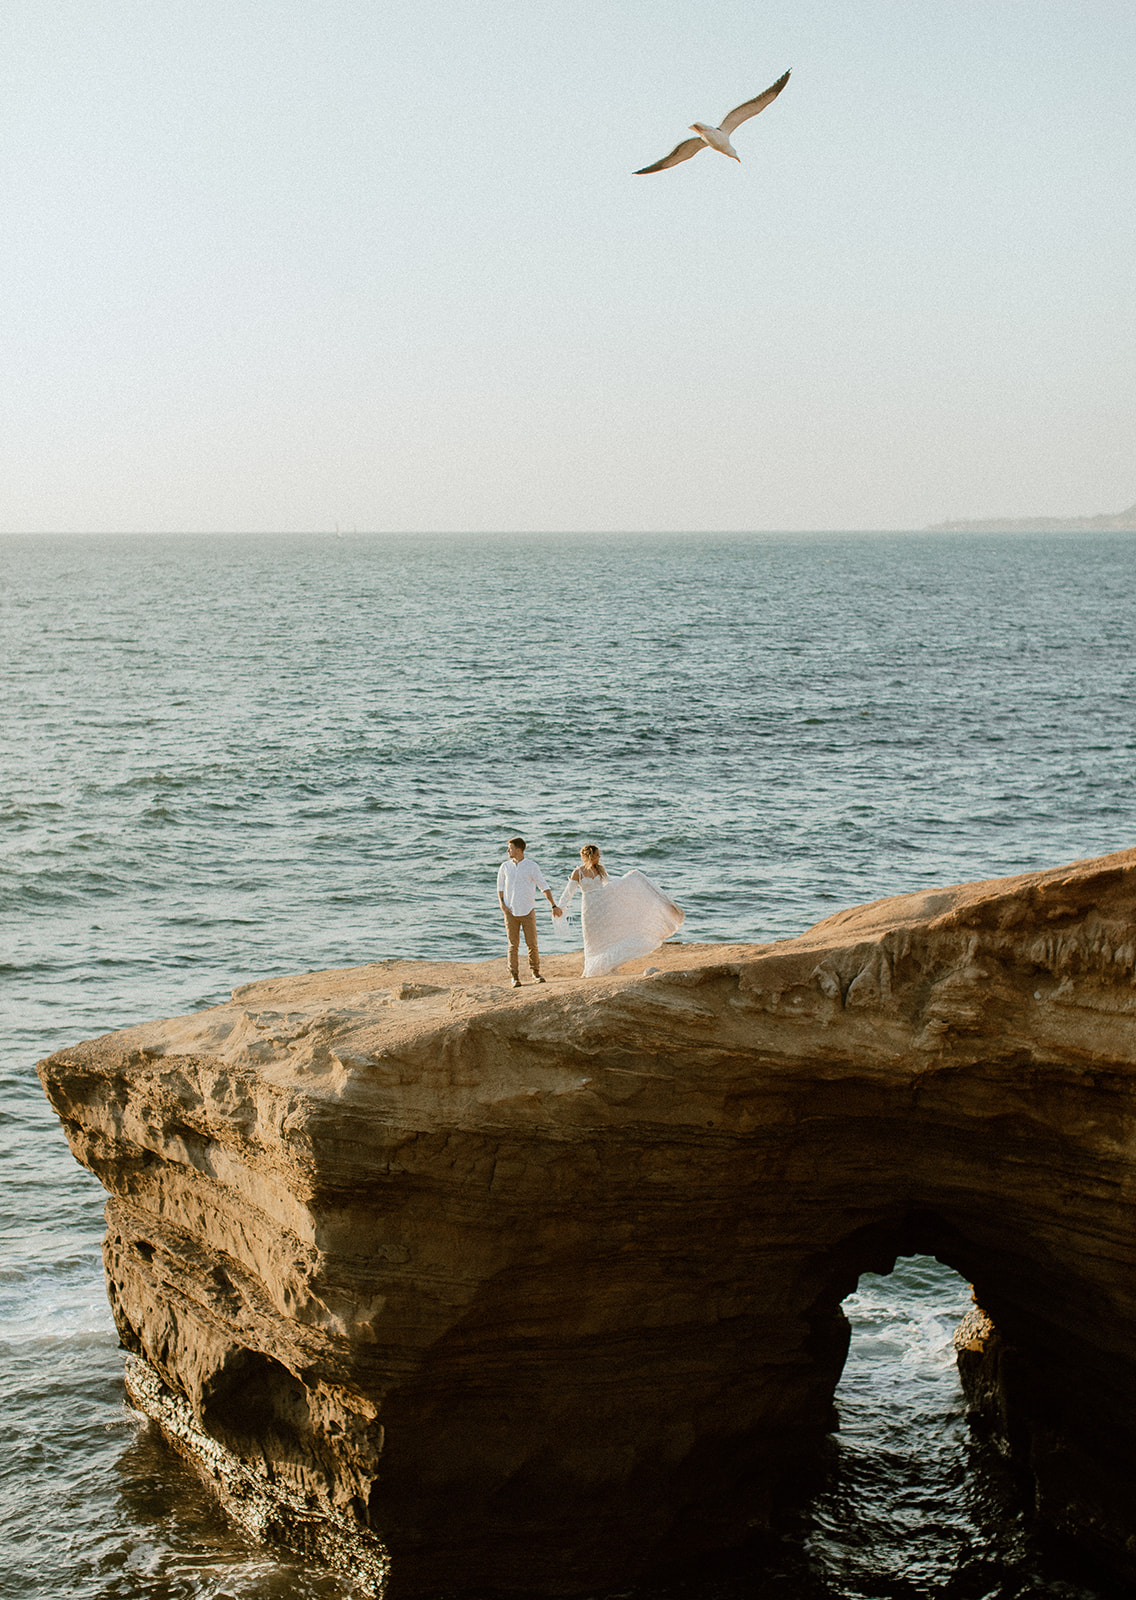 Sunset cliffs elopement, California. The stunning ocean and cliffs were the perfect backdrop for this styled elopement shoot with an adventurous style